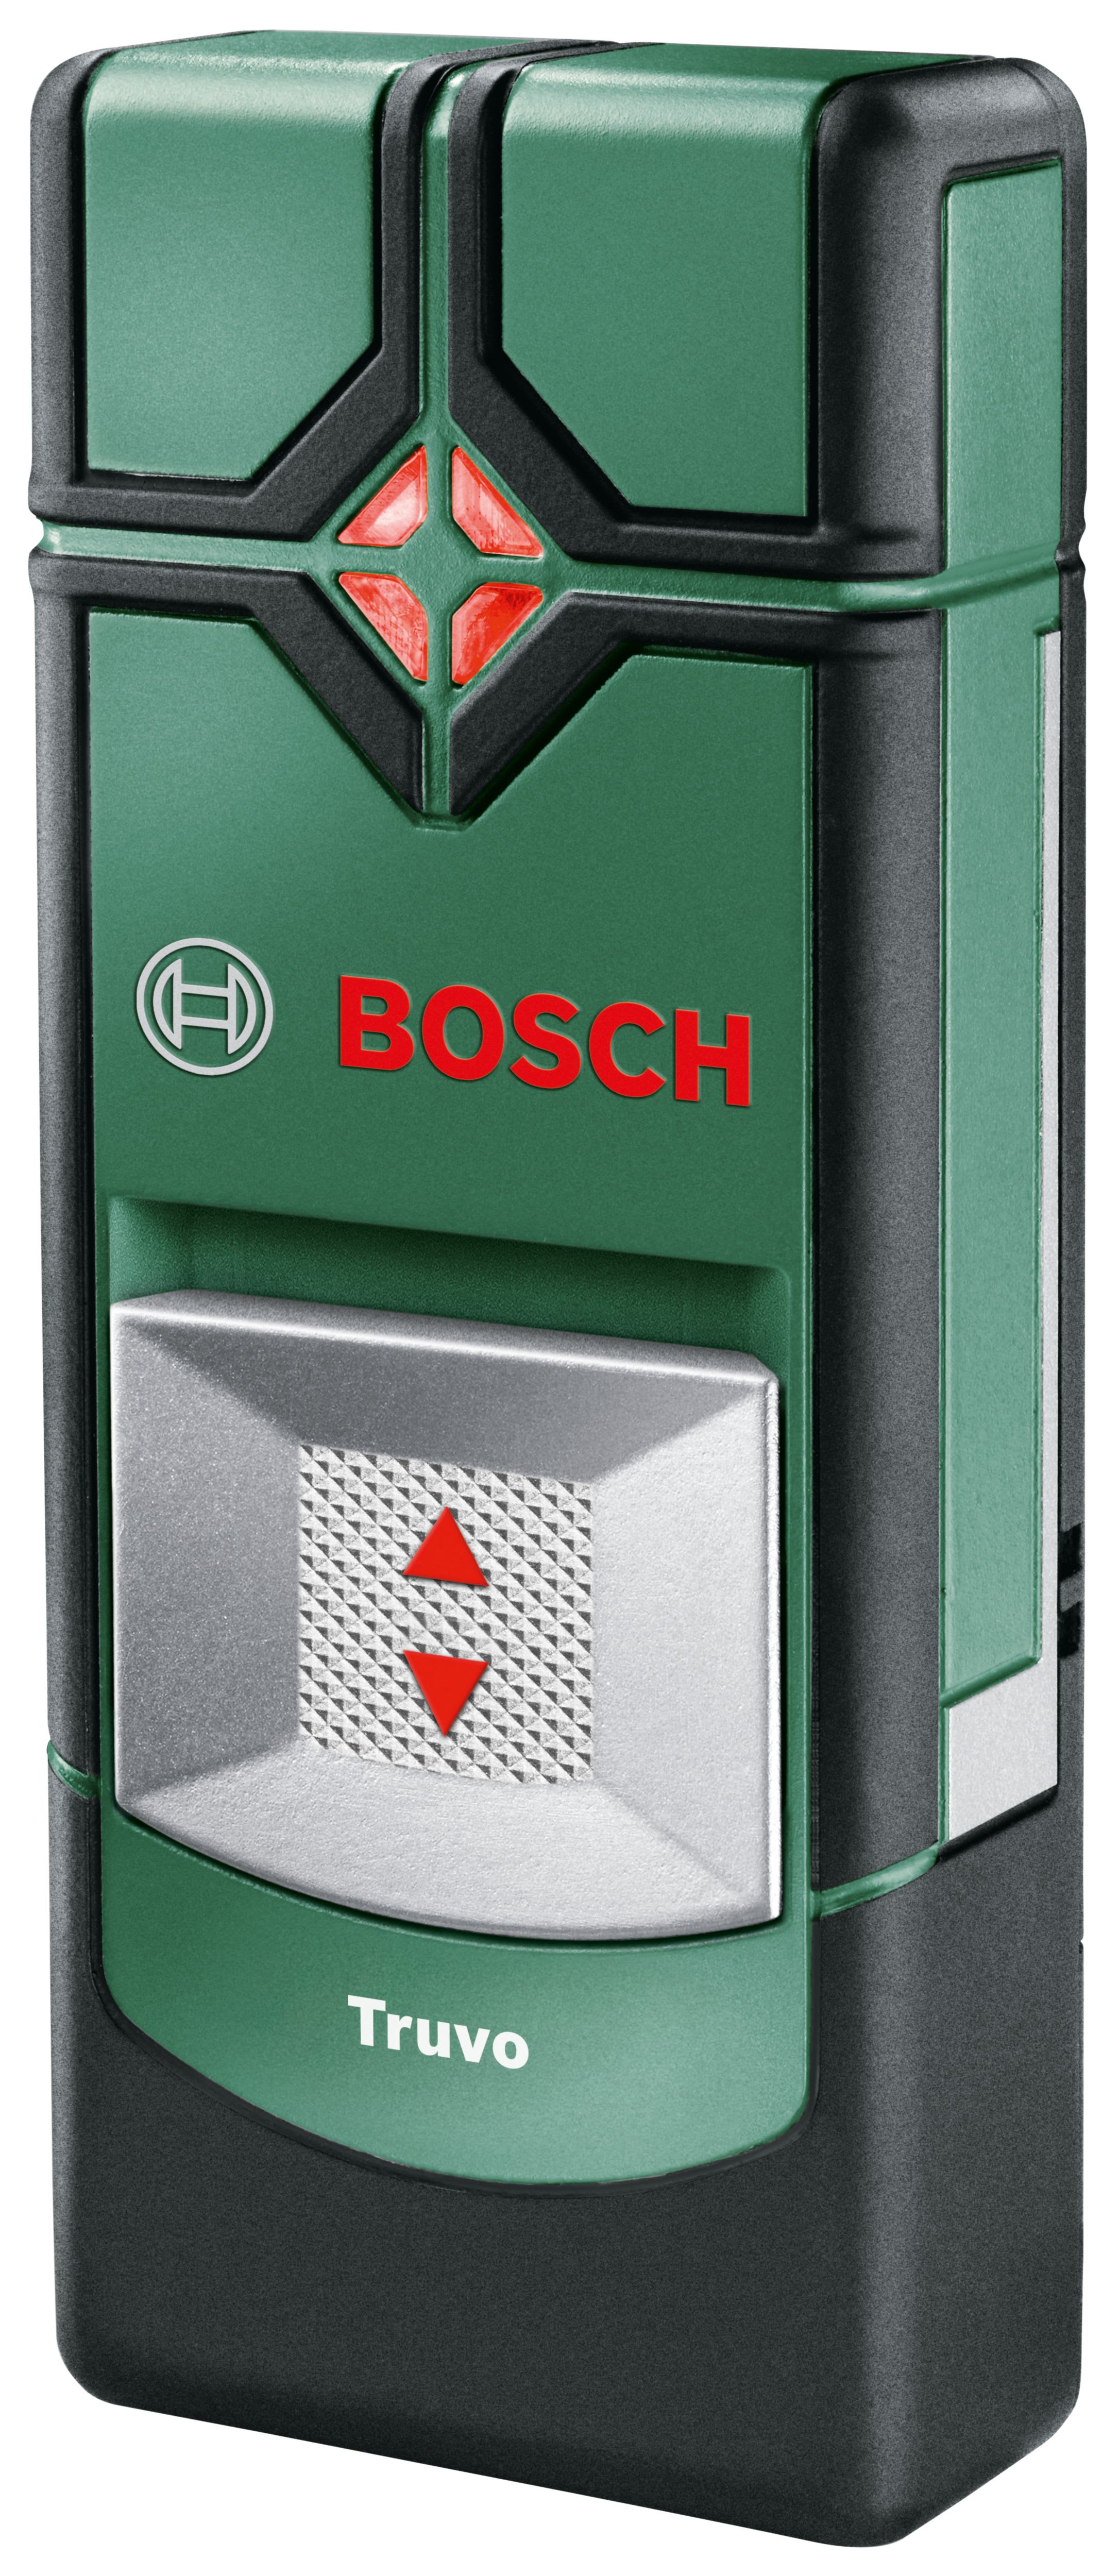 Bosch Truvo Pipe and Cable Digital Detector